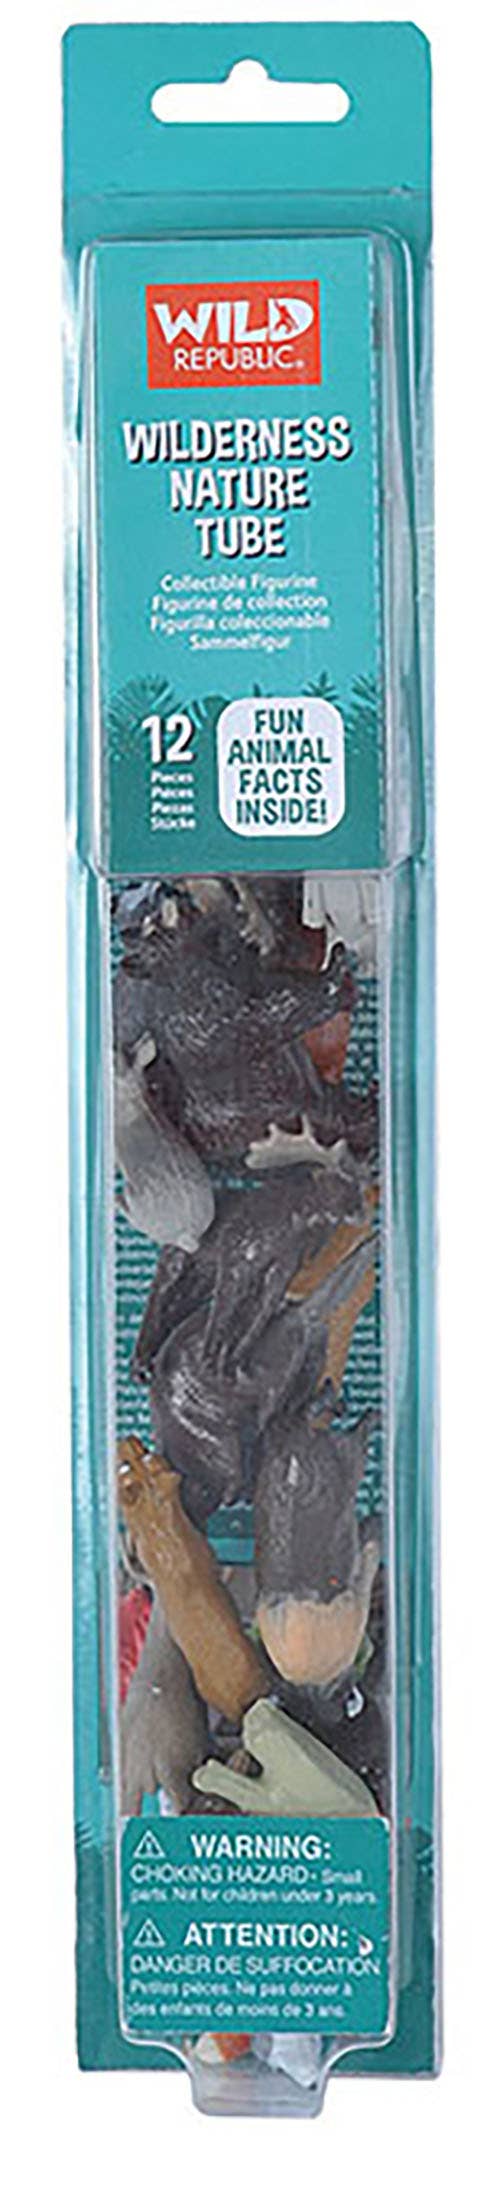 Wildlife Toy Figurines in a Tube